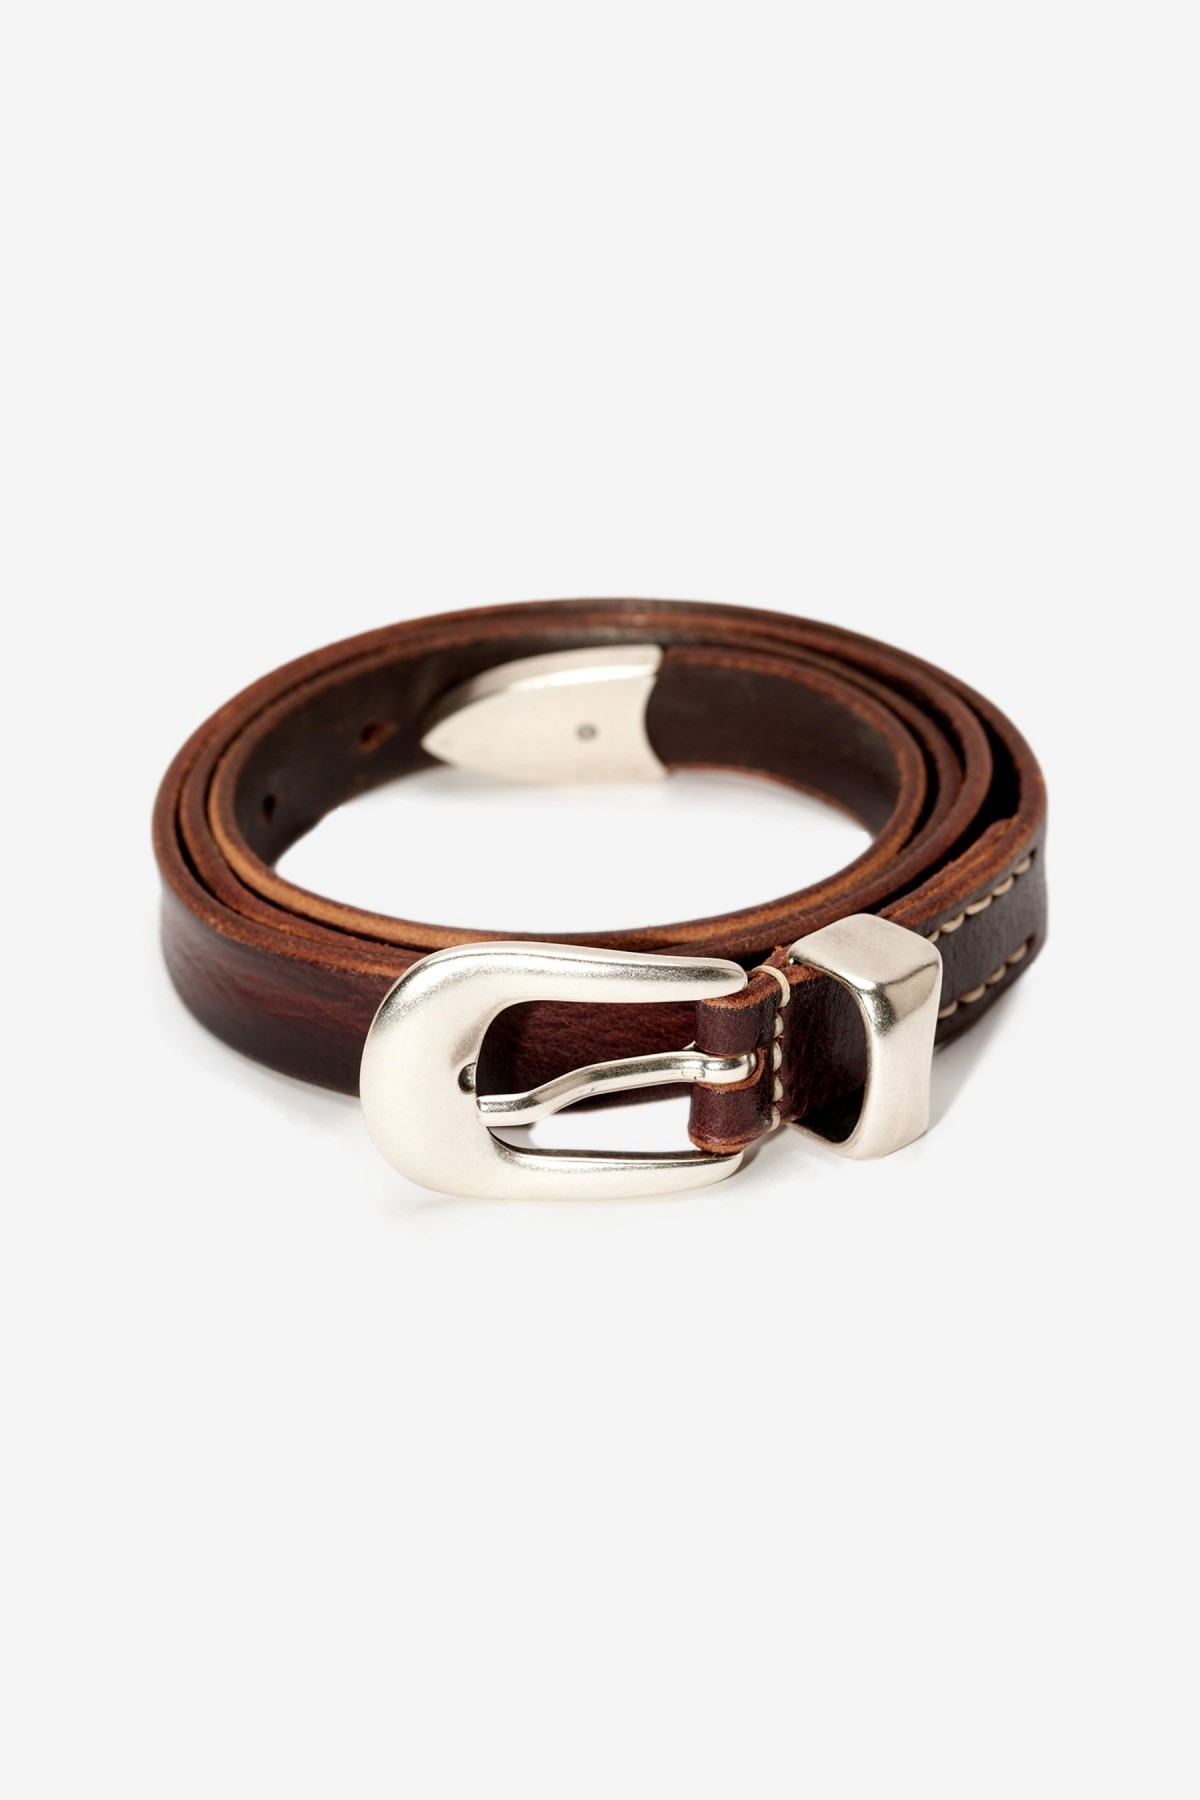 Our Legacy Belt 2 cm in Brown Leather